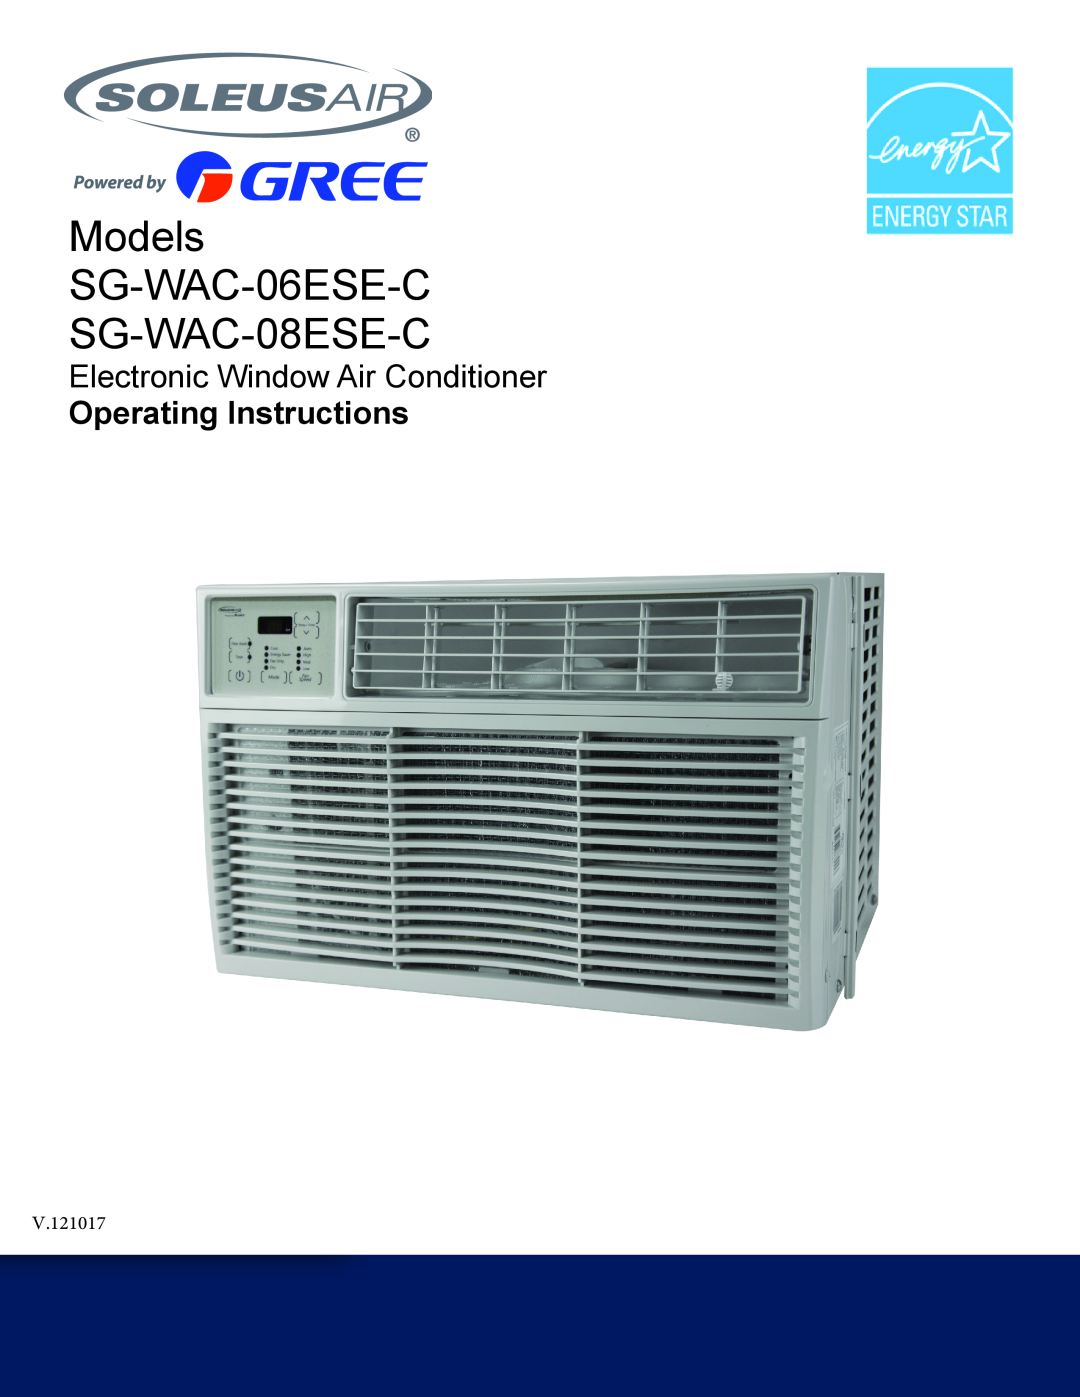 Soleus Air manual Models SG-WAC-06ESE-C SG-WAC-08ESE-C, Electronic Window Air Conditioner, Operating Instructions 